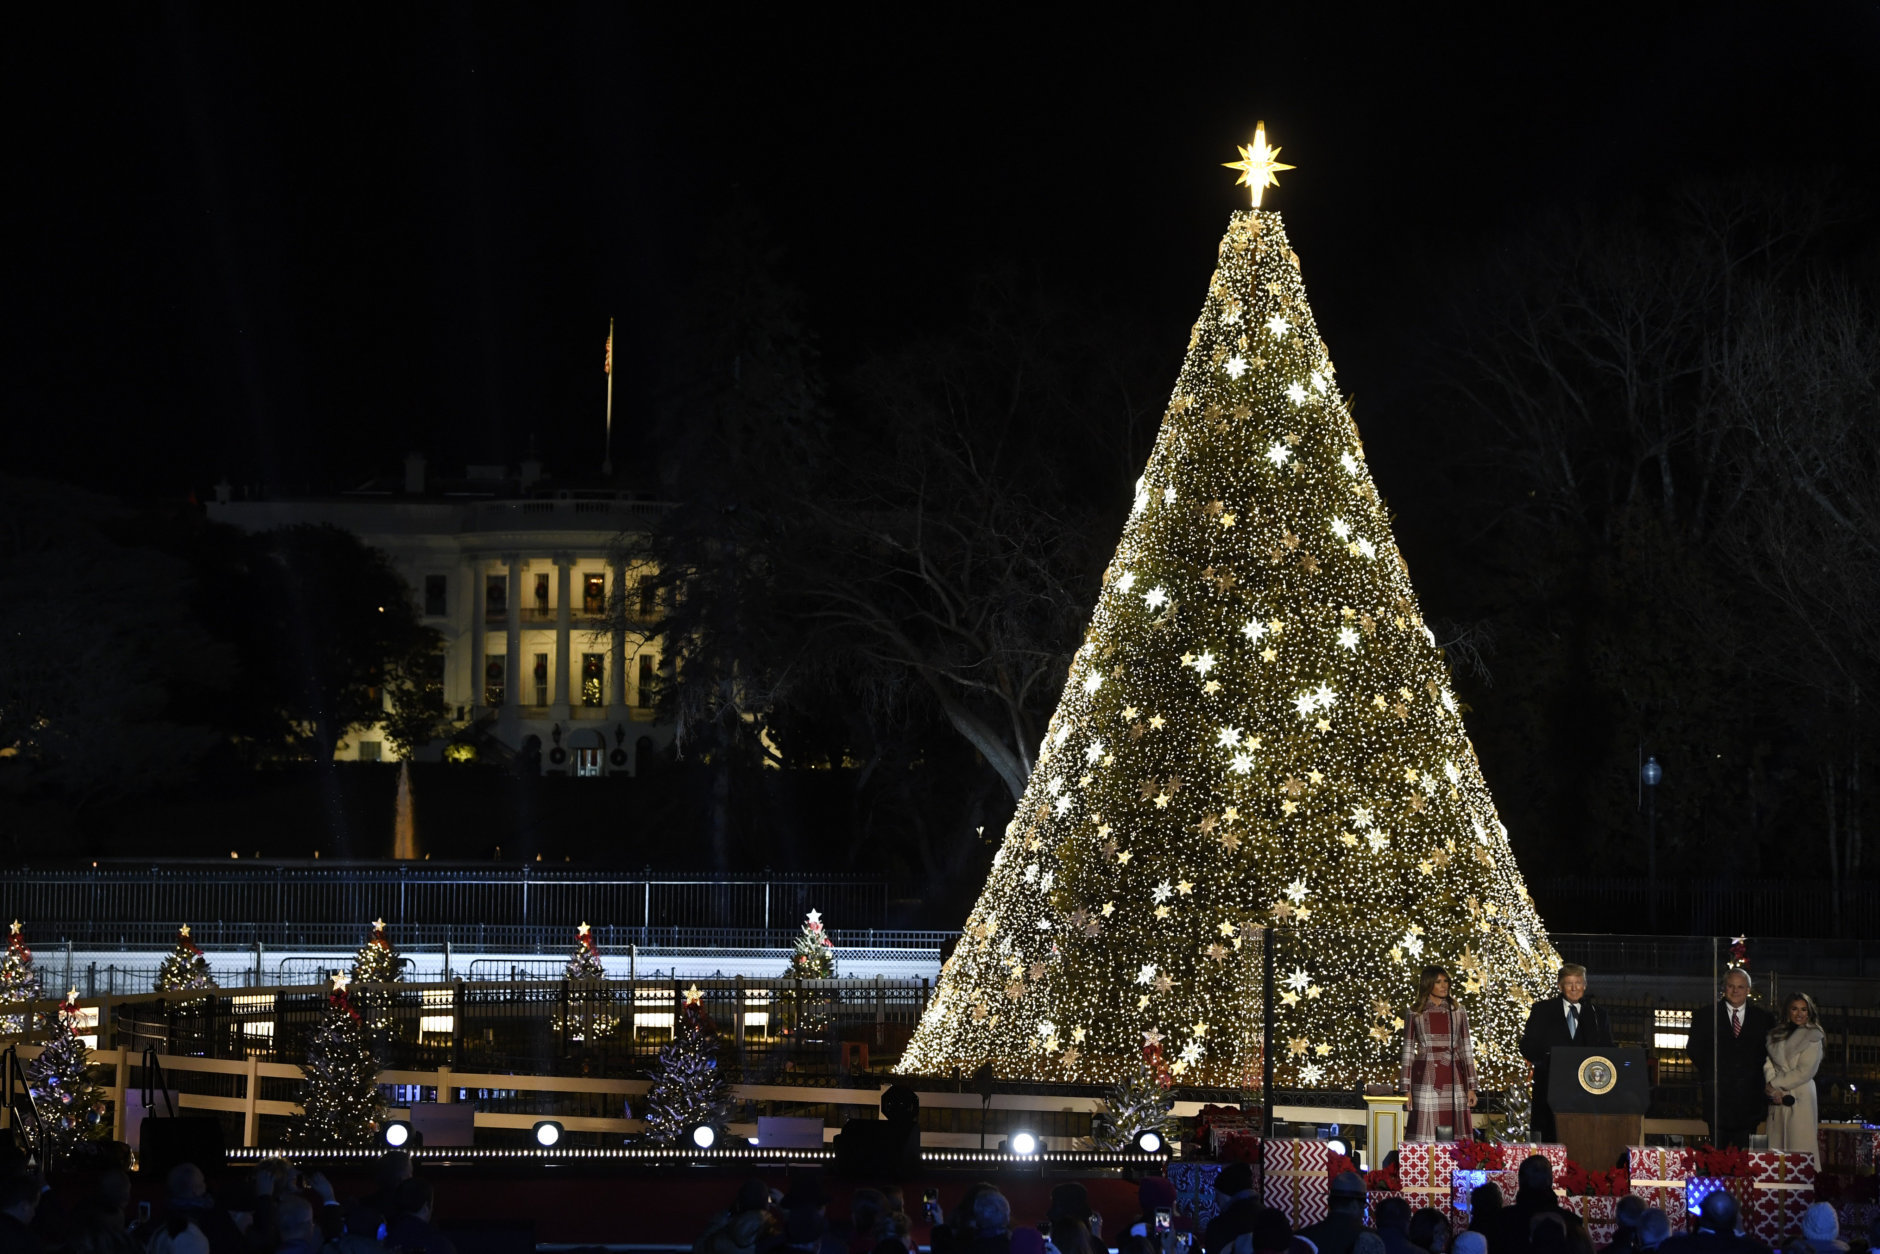 <h2>Marvel at the National Christmas Tree</h2>
<p>You just missed the <a href="https://wtop.com/holidays/2019/12/trump-lights-national-christmas-tree-in-holiday-tradition/" target="_blank" rel="noopener">National Christmas Tree lighting earlier this month</a>, but you can still plan a trip to see the 30-foot tree. It&#8217;s lit every day from around 4:30 p.m. to midnight as part of the America Celebrates display at the President&#8217;s Park. If you visit from Dec. 11 to 15 and Dec. 17 and 22, you can even catch a live performance. See <a href="https://www.nps.gov/whho/planyourvisit/national_christmas_tree_music_program.htm" target="_blank" rel="noopener">when there are performances</a> online.</p>
